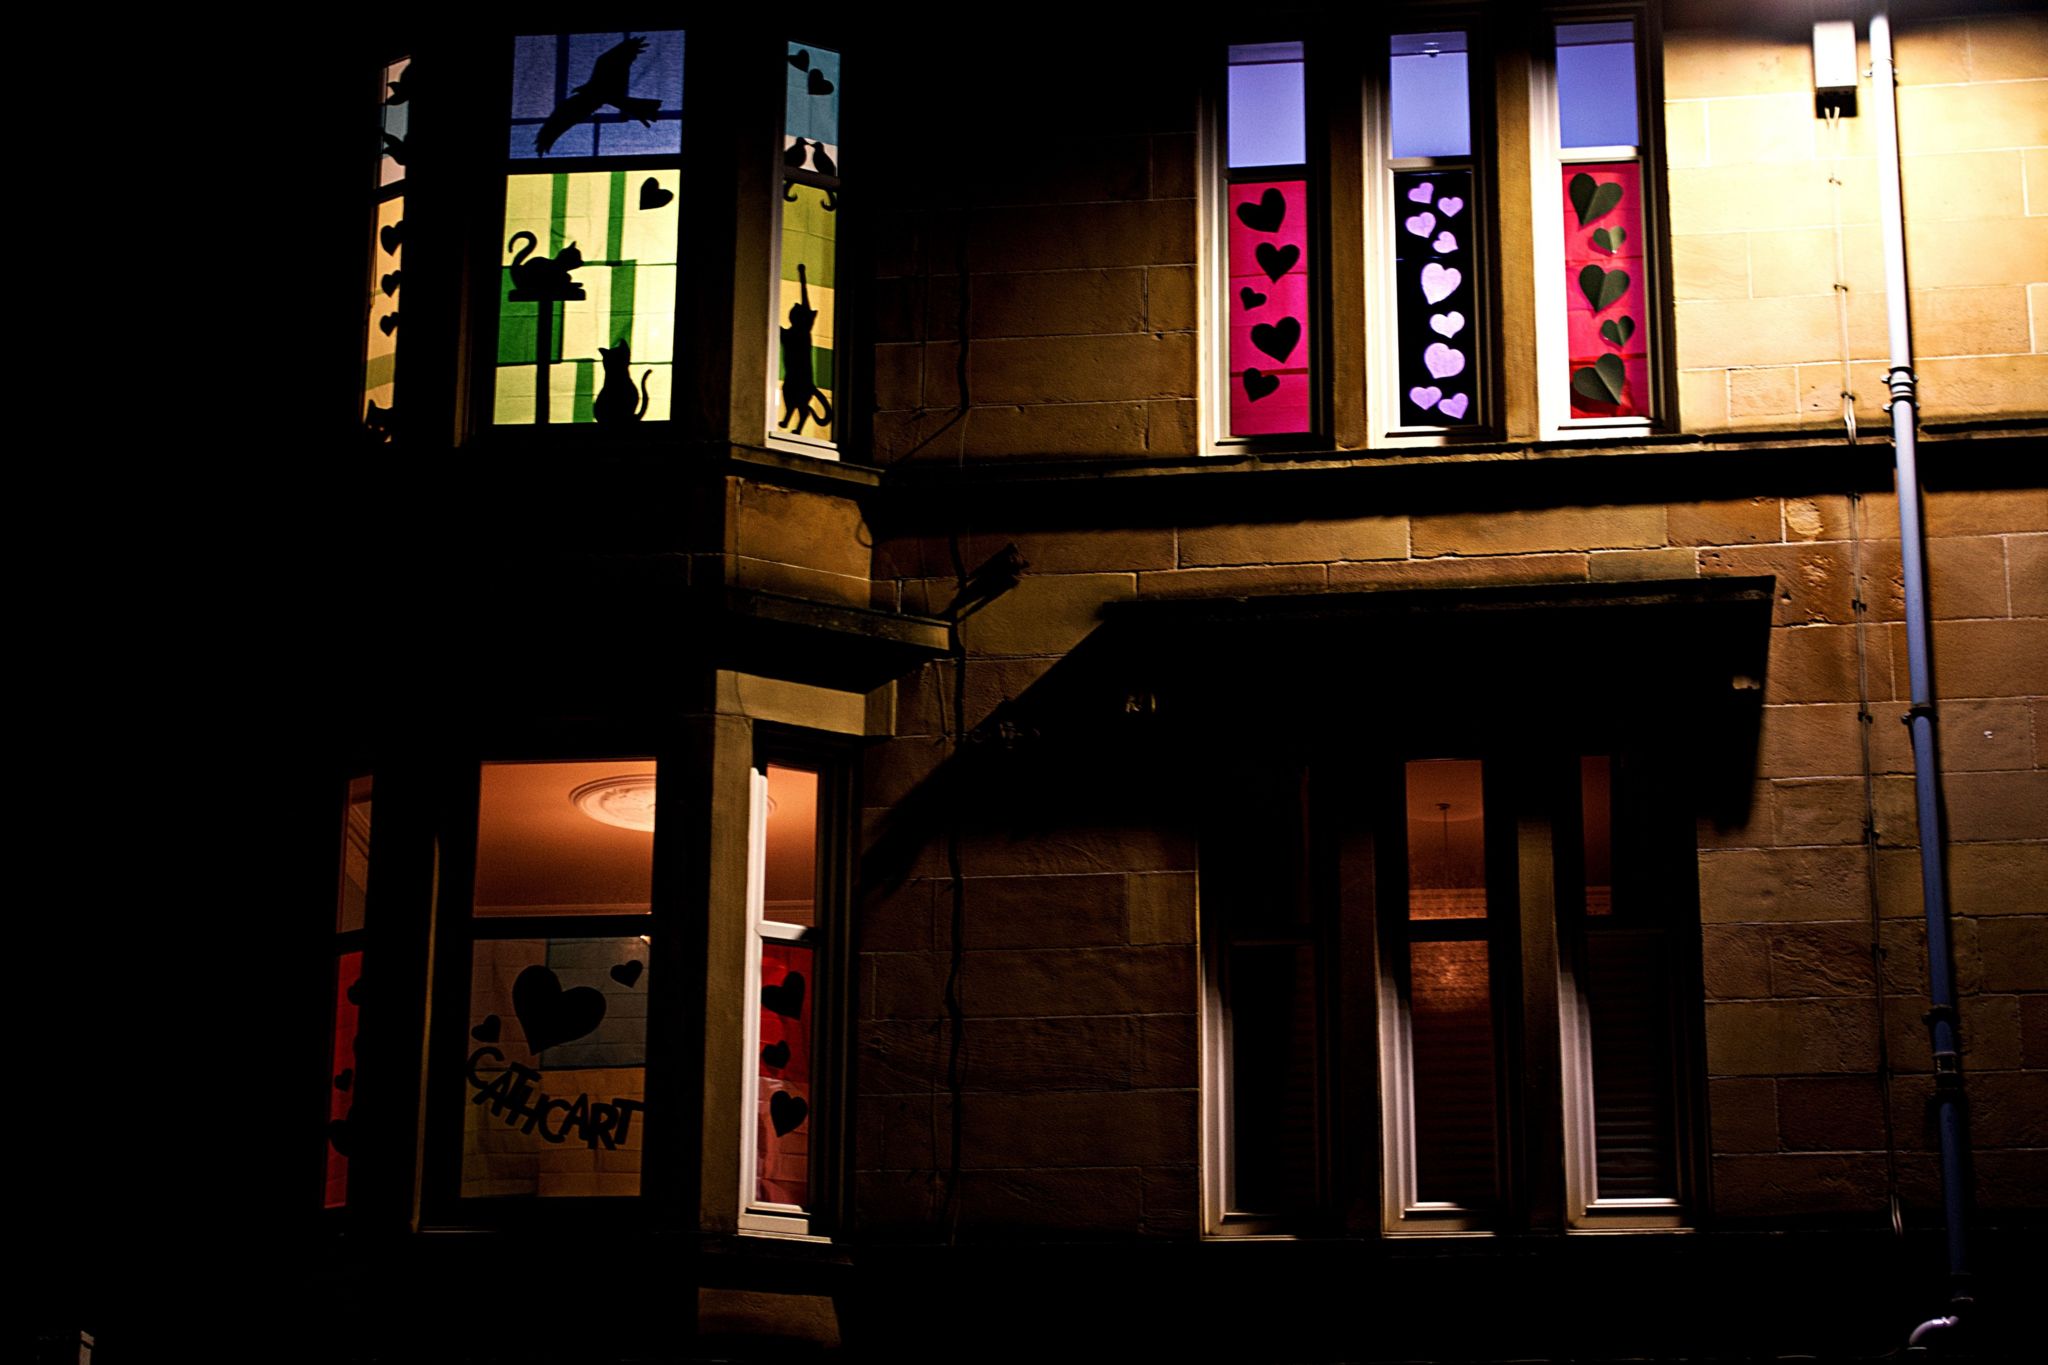 Colourfully lit up windows show black outlines of cats, hearts and letters spelling Cathcart